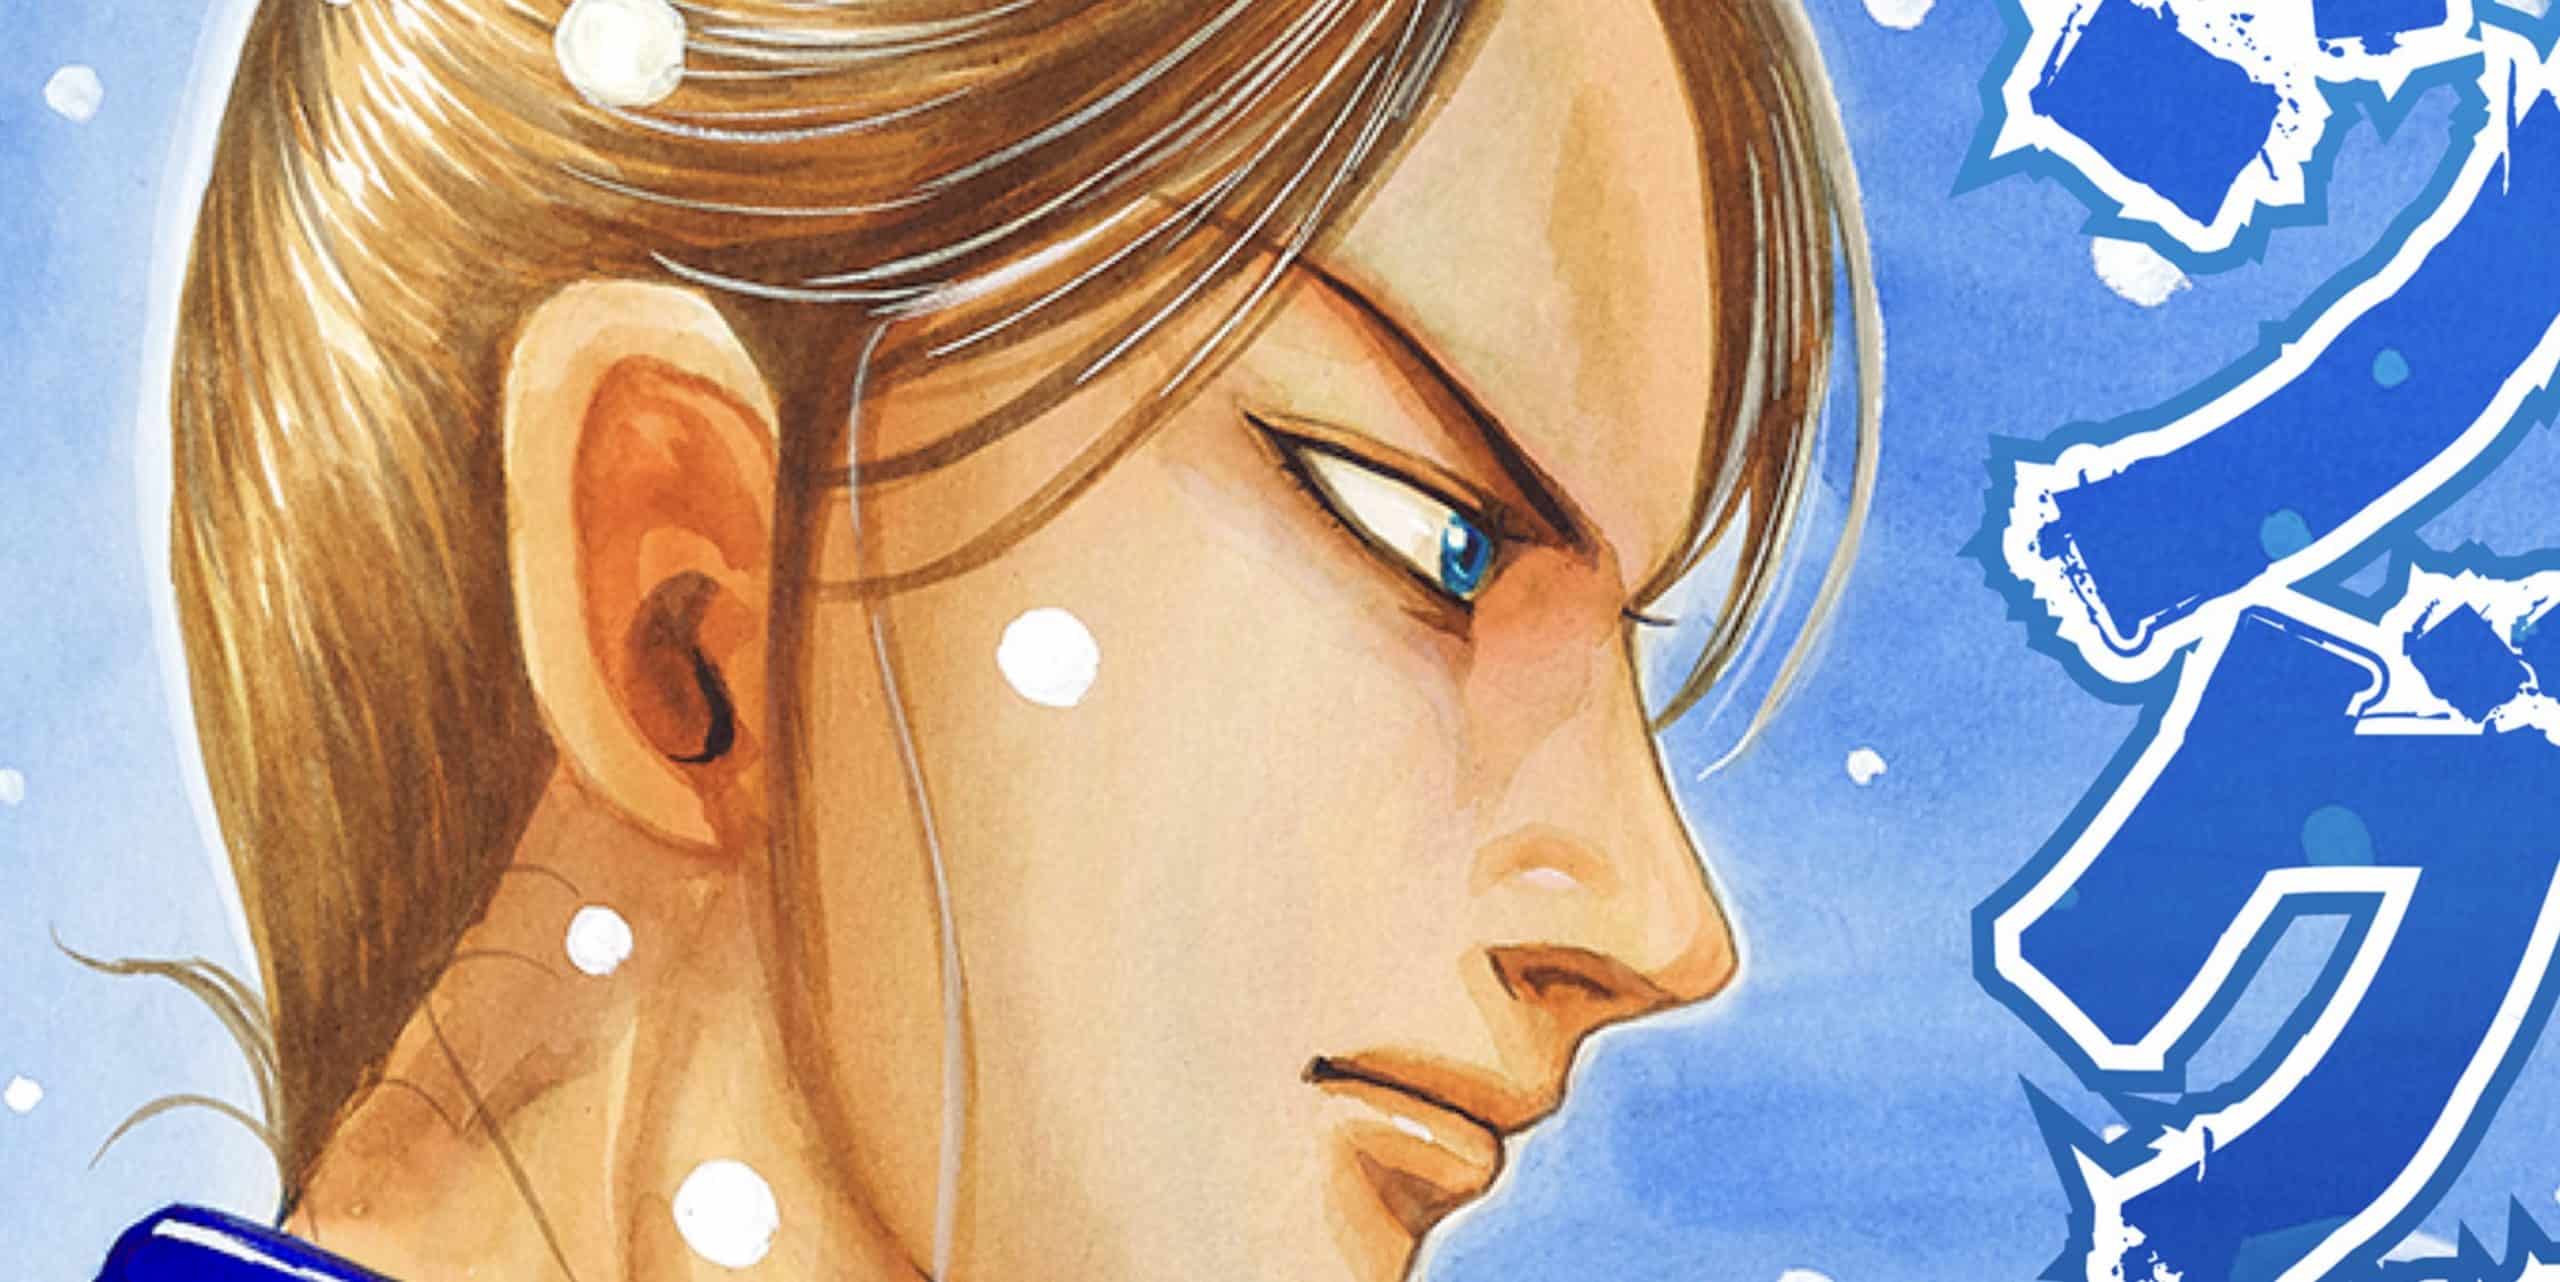 Kingdom Chapter 760 release date